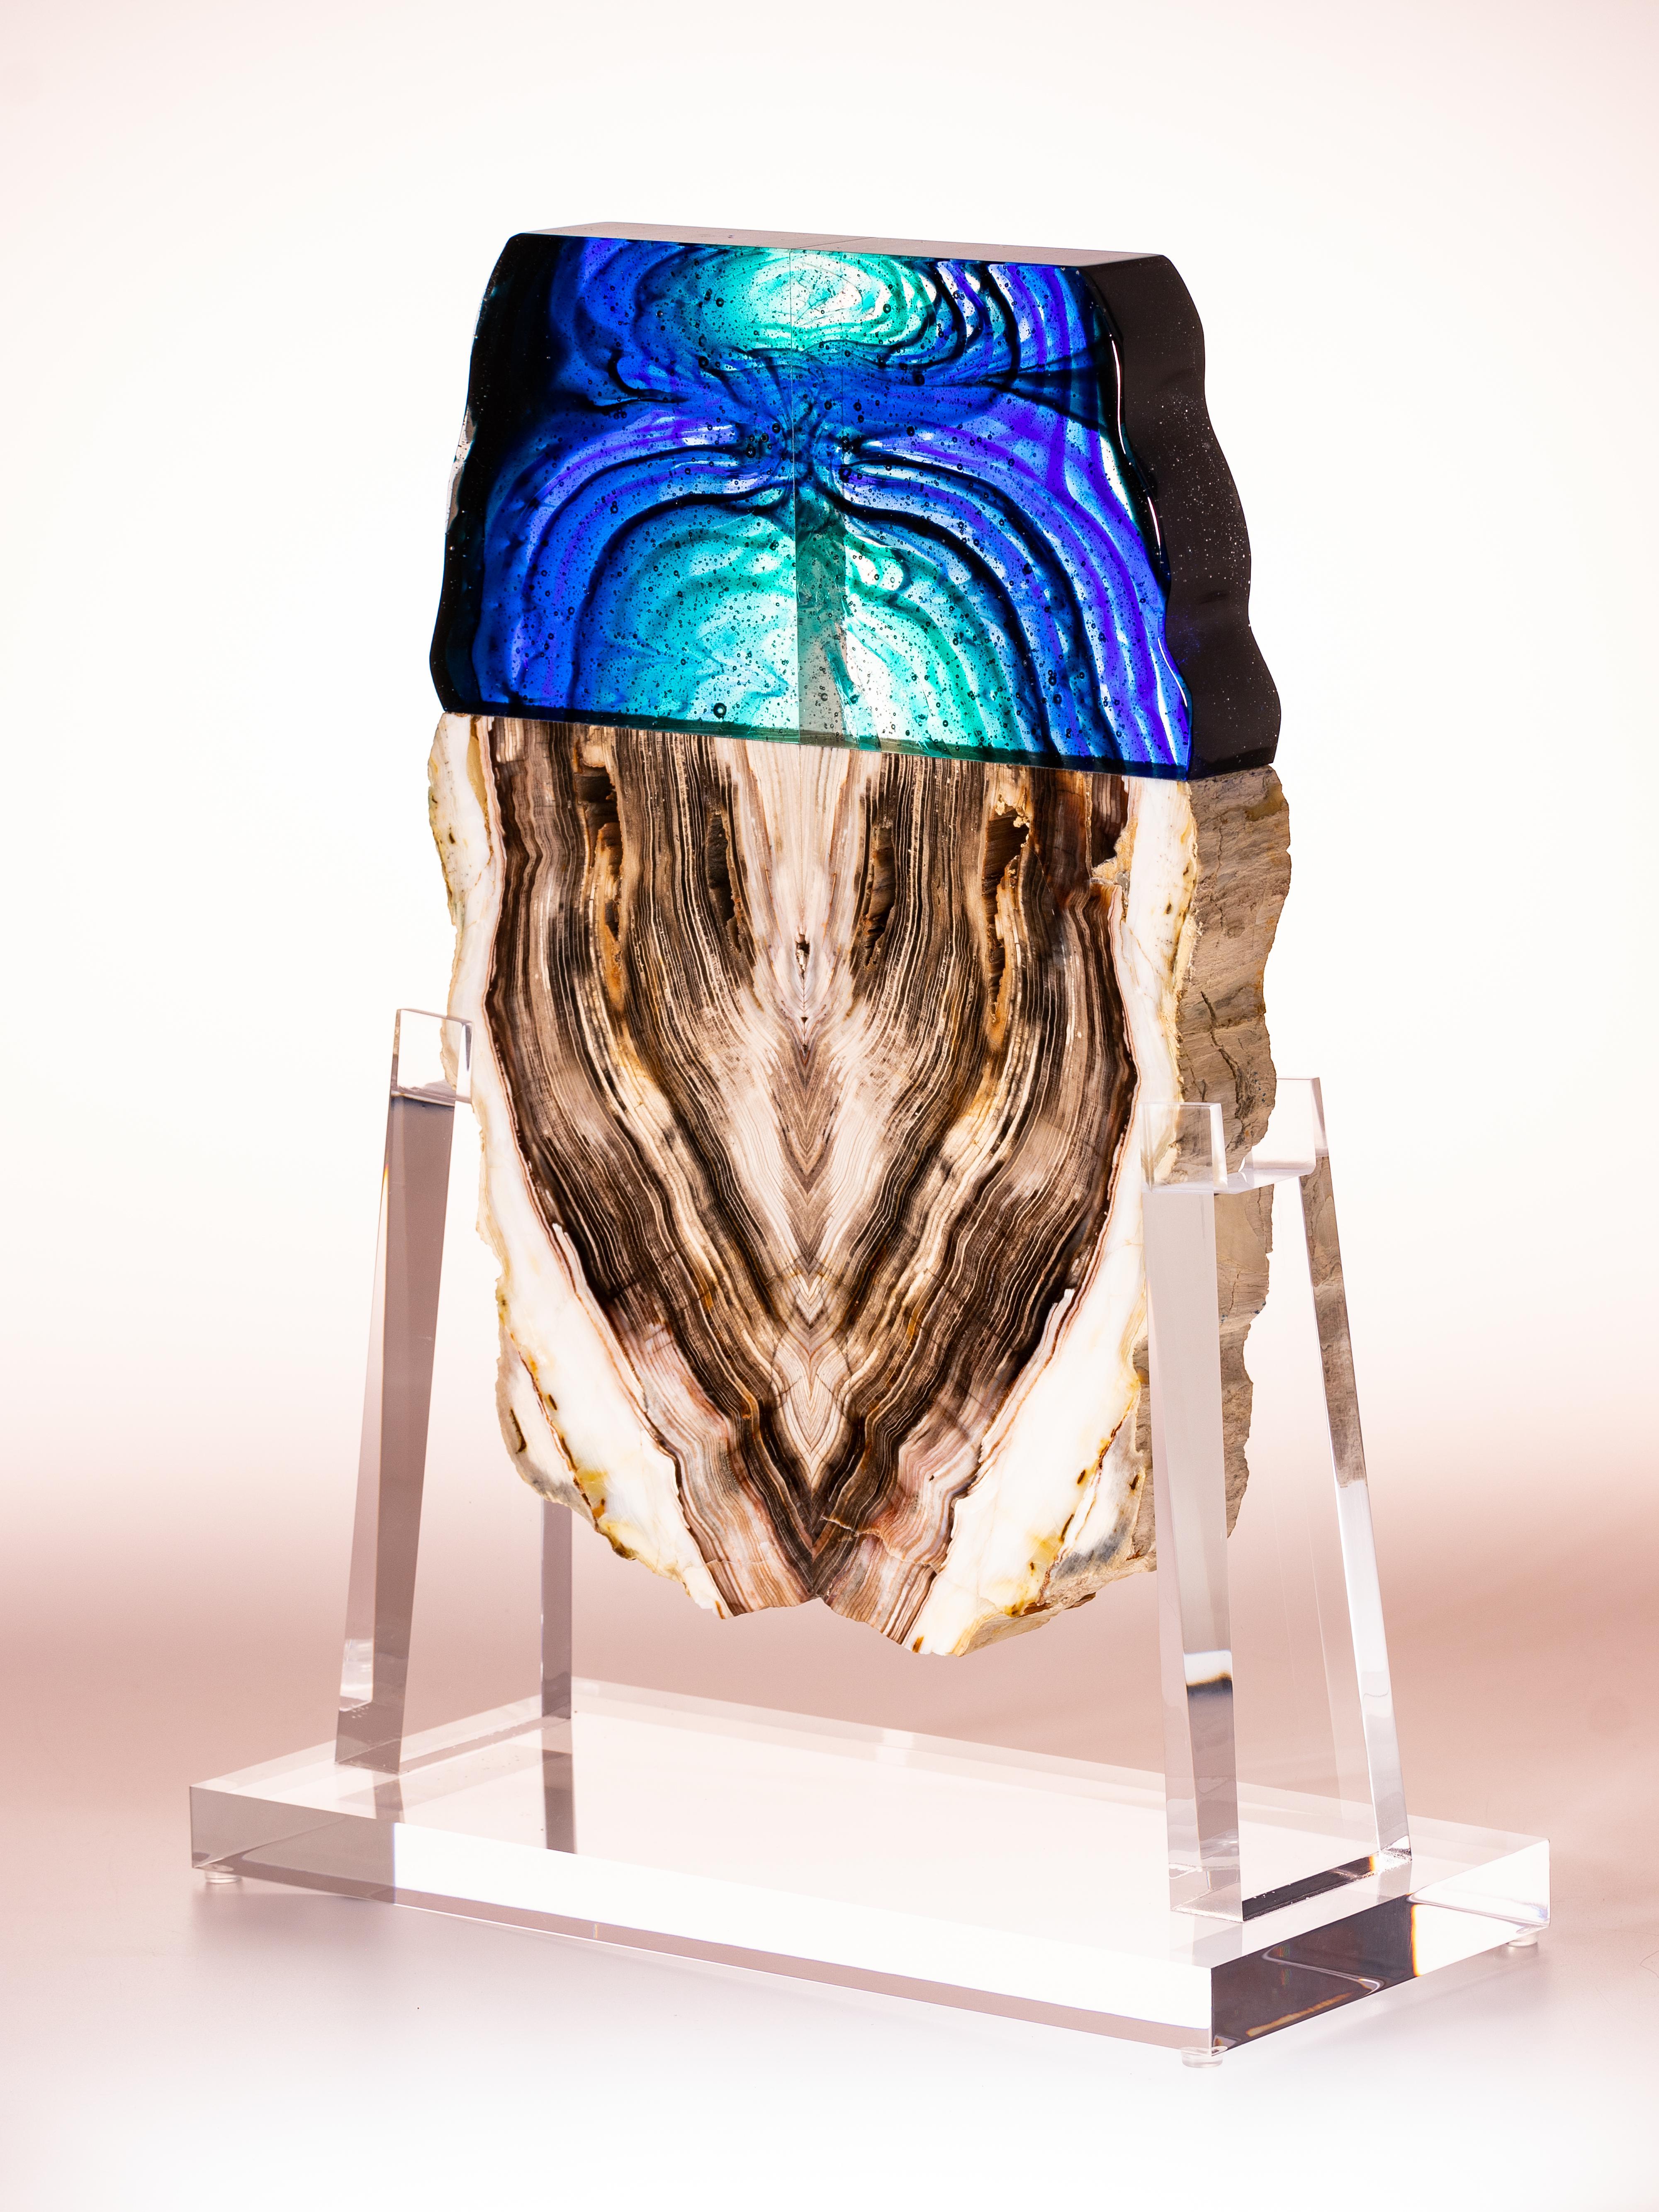 Petrified wood and glass sculpture collaboration between glass artist Orfeo Quagliata and Pietra Gallery artist Ernesto Duran.
This piece is called 